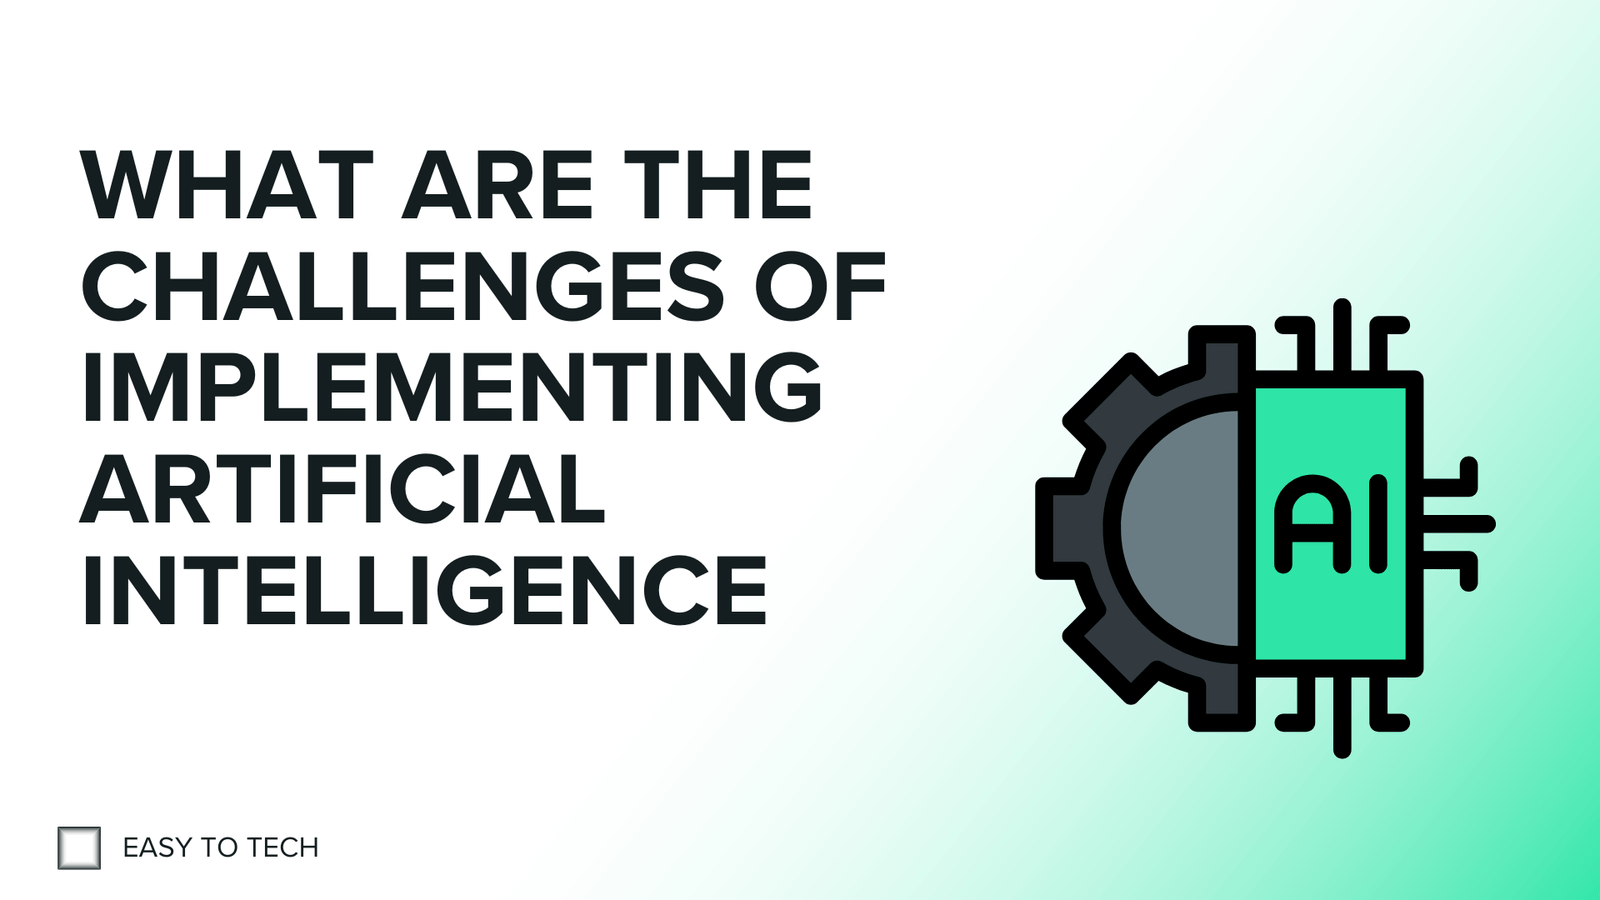 What are the challenges of implementing artificial intelligence